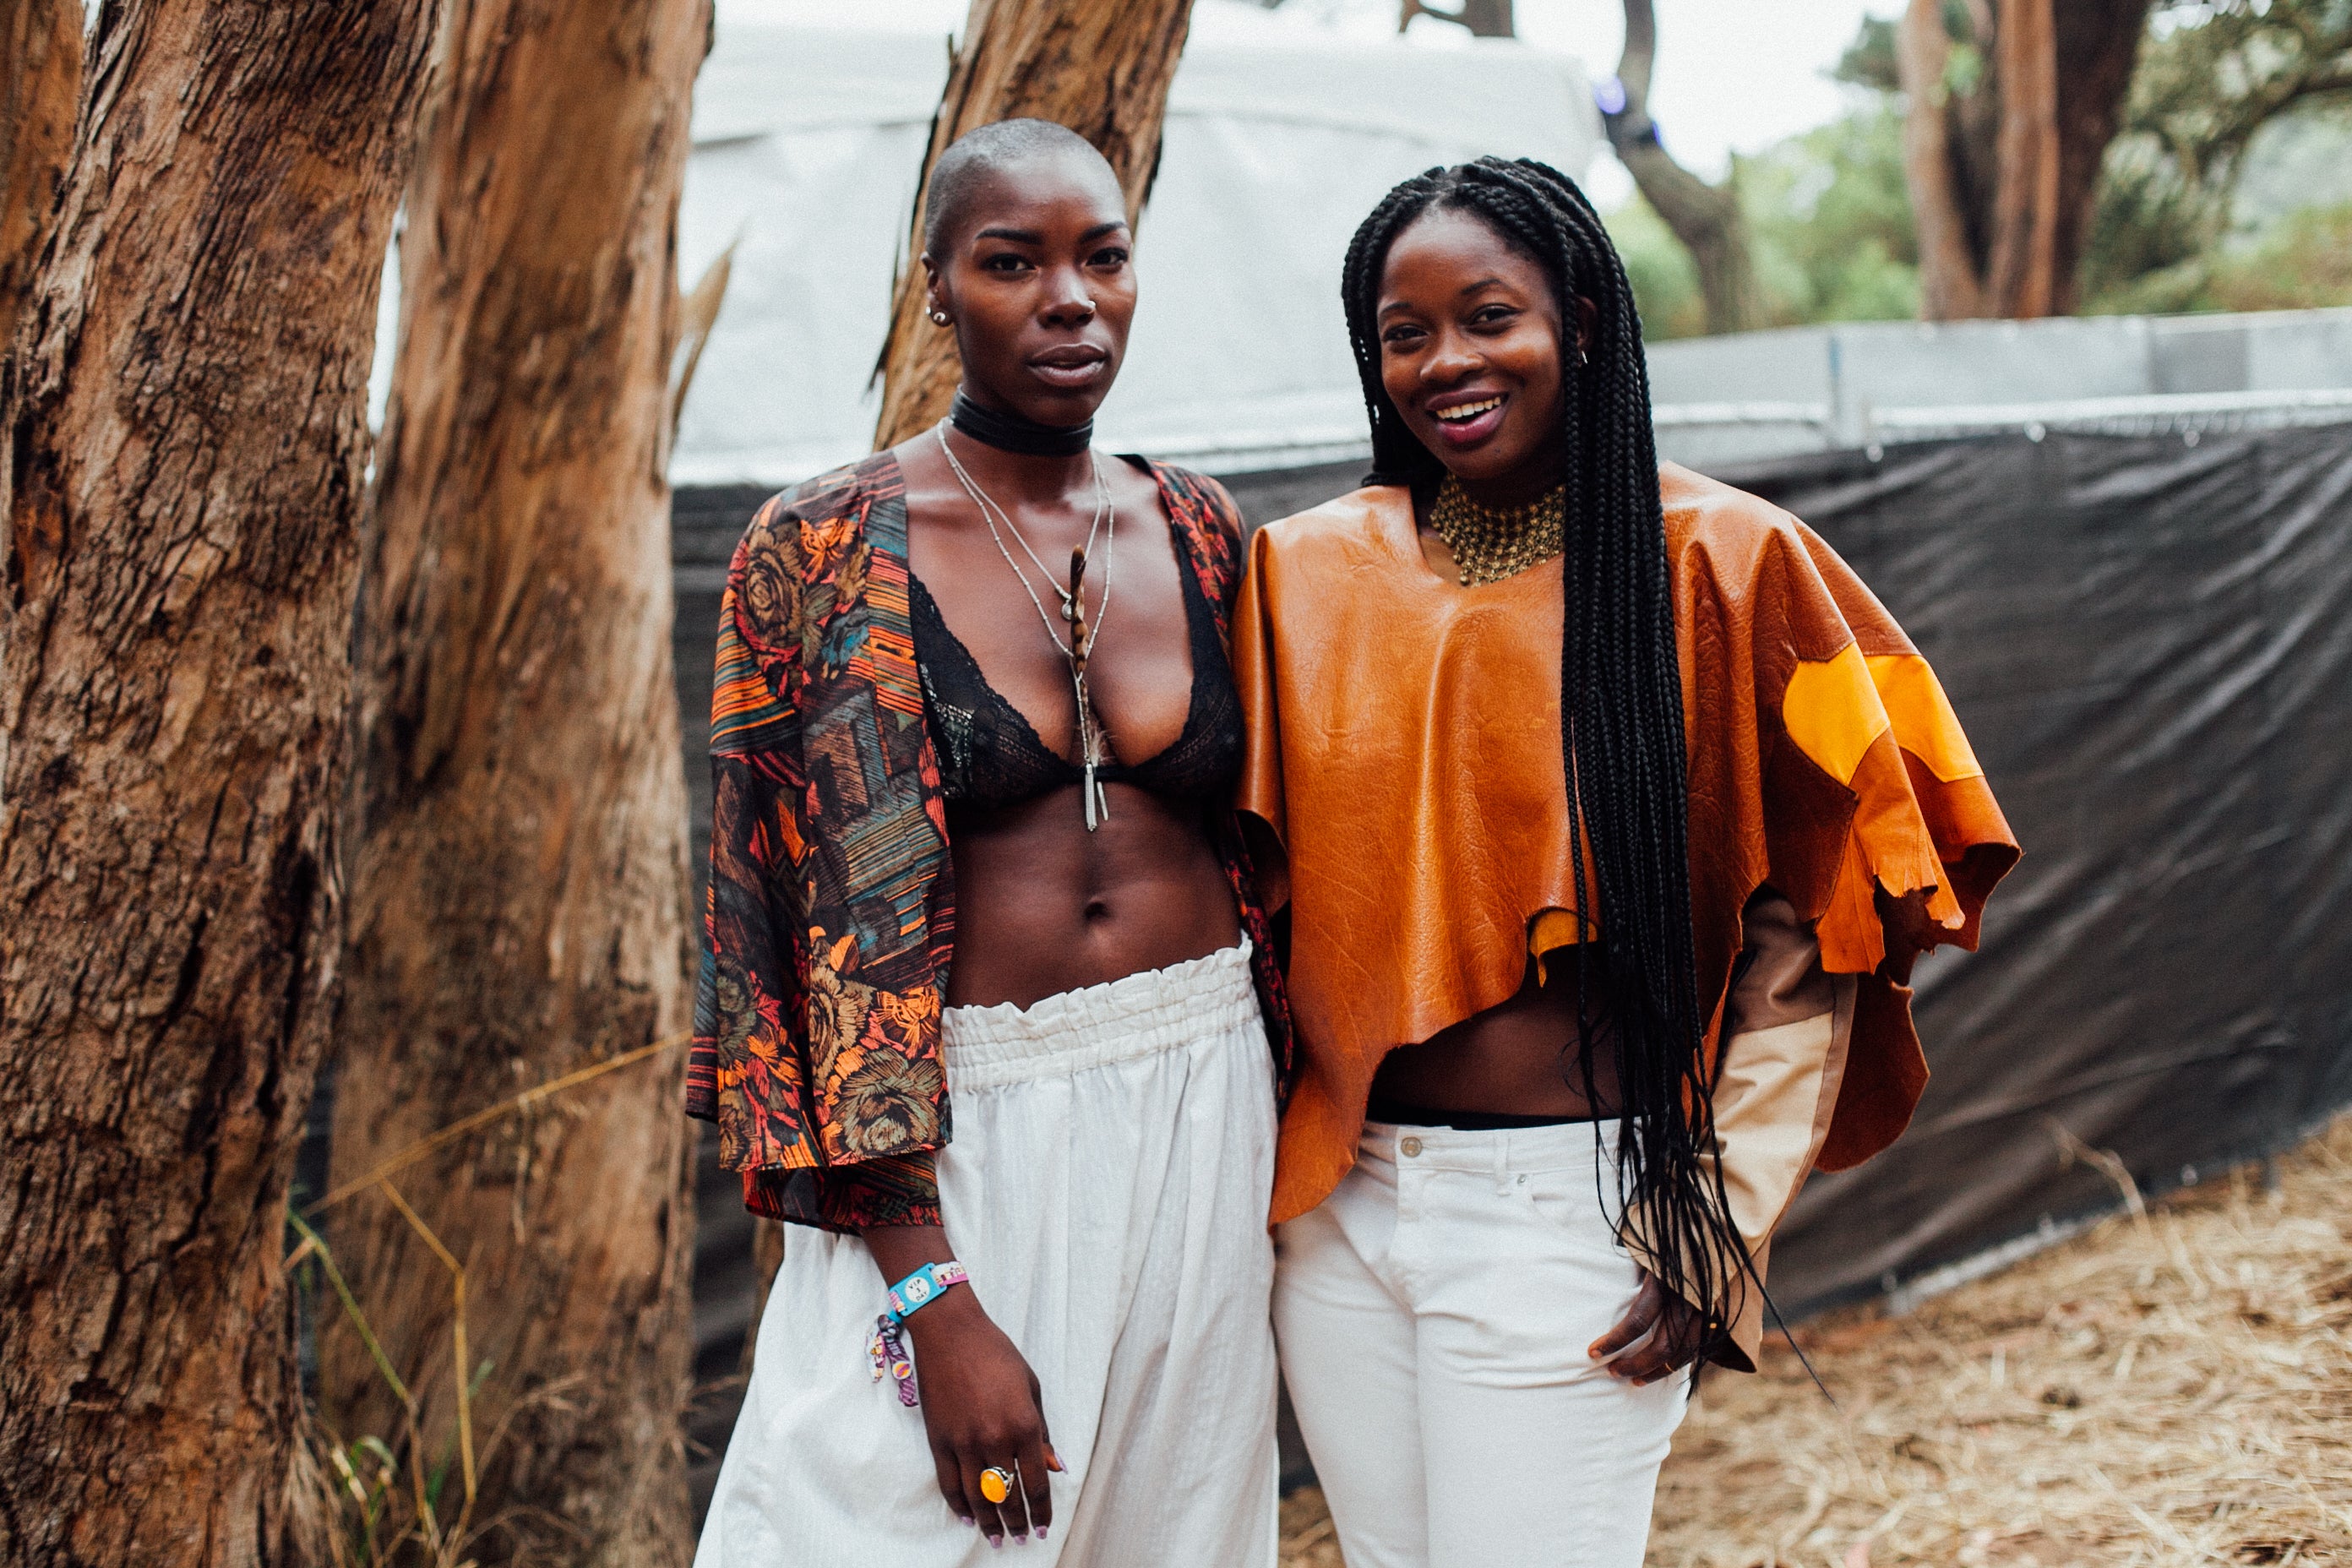 All The Coolest Looks From Outside Lands Music and Arts Festival
